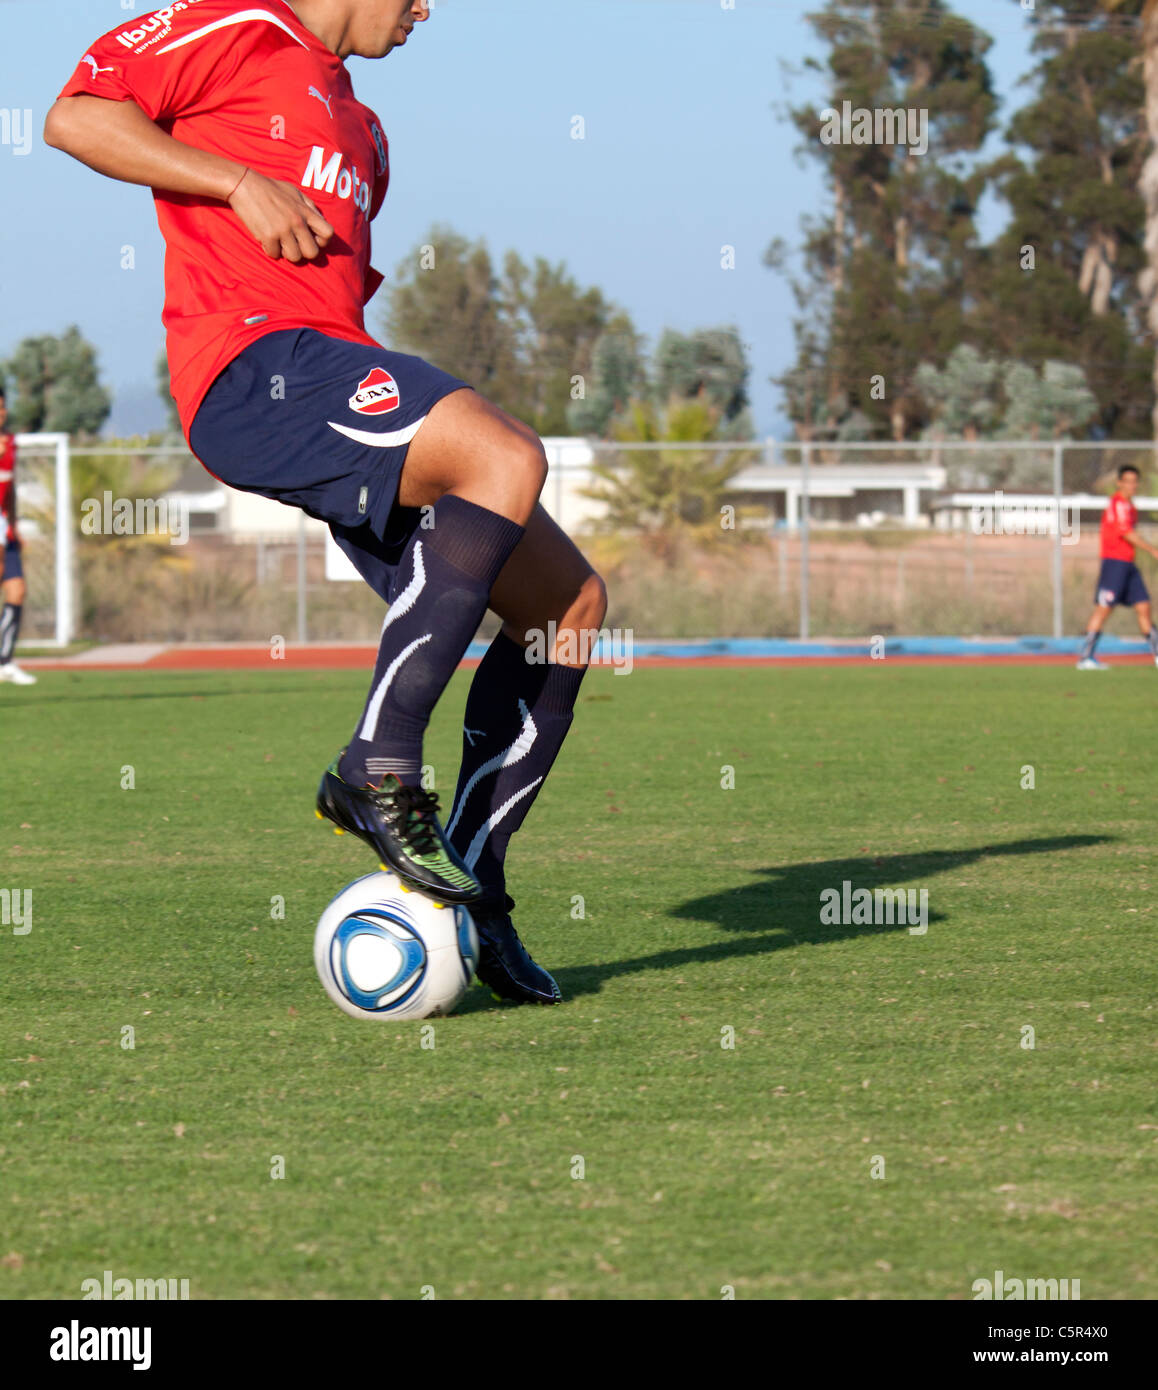 Soccer player dribbling the ball on the field Stock Photo